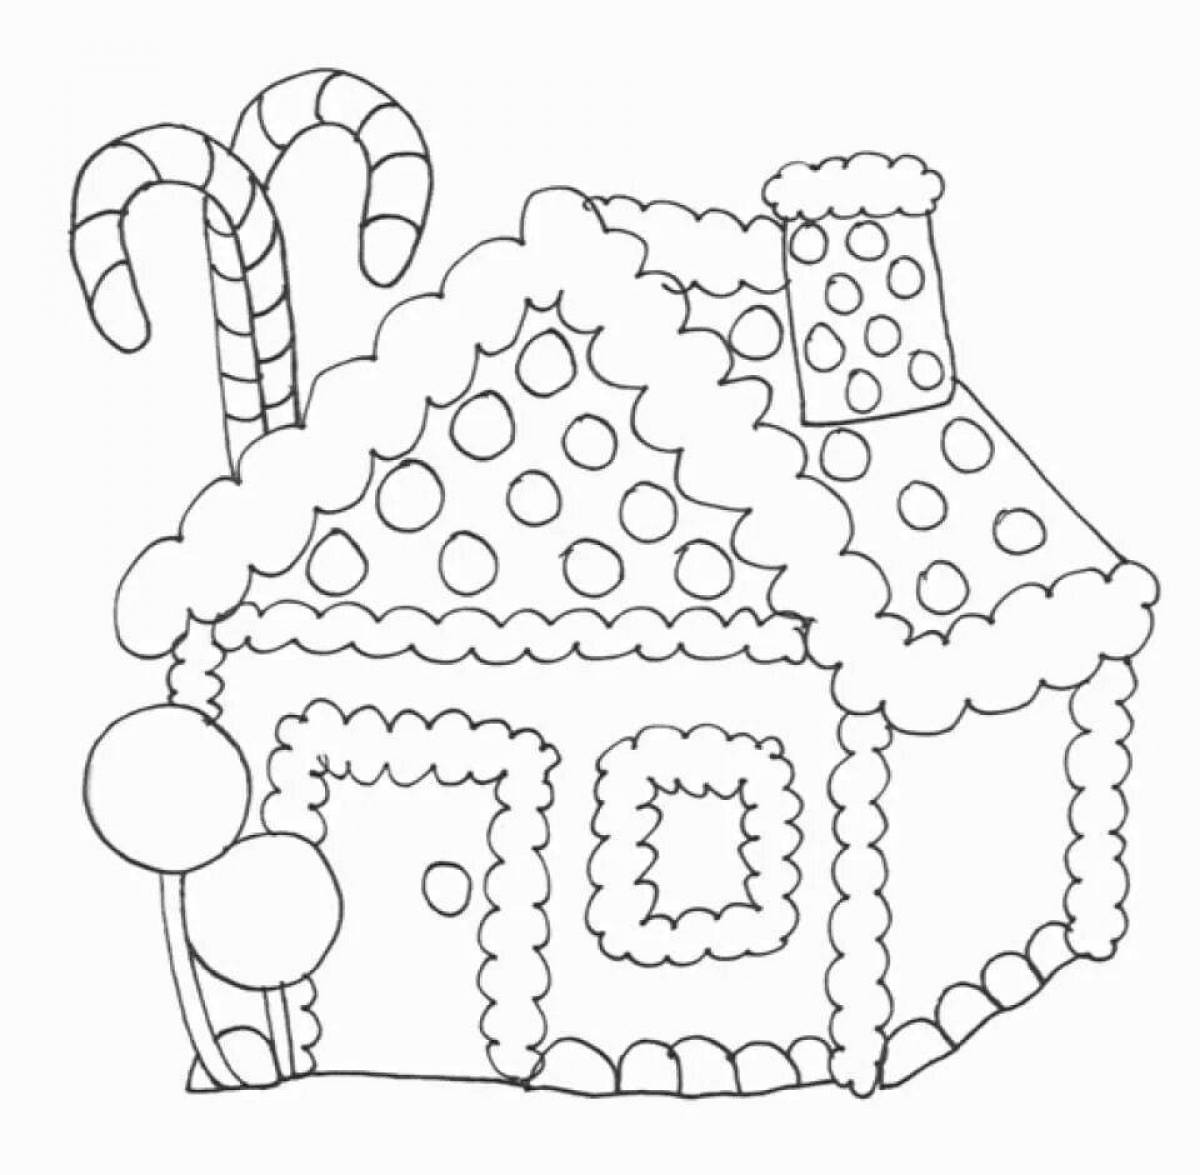 Coloring cute gingerbread house for kids